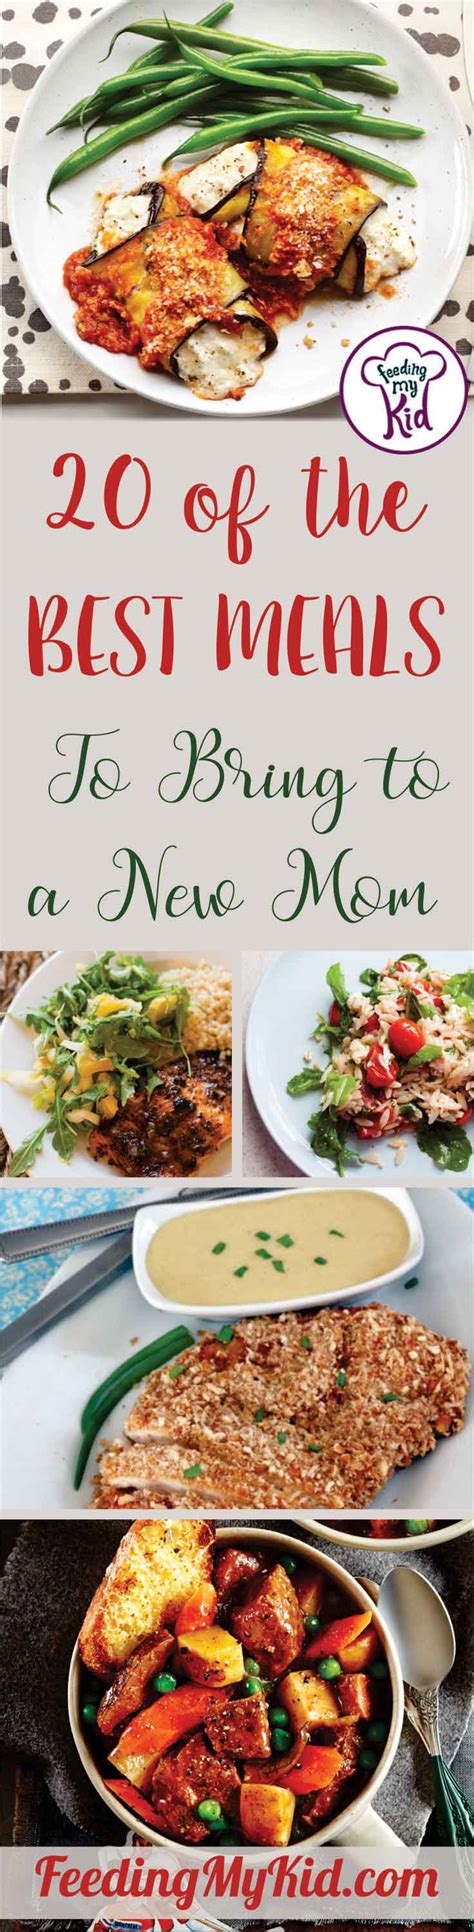 Meals For New Moms 20 Of The Best Meals To Bring To A New Mom